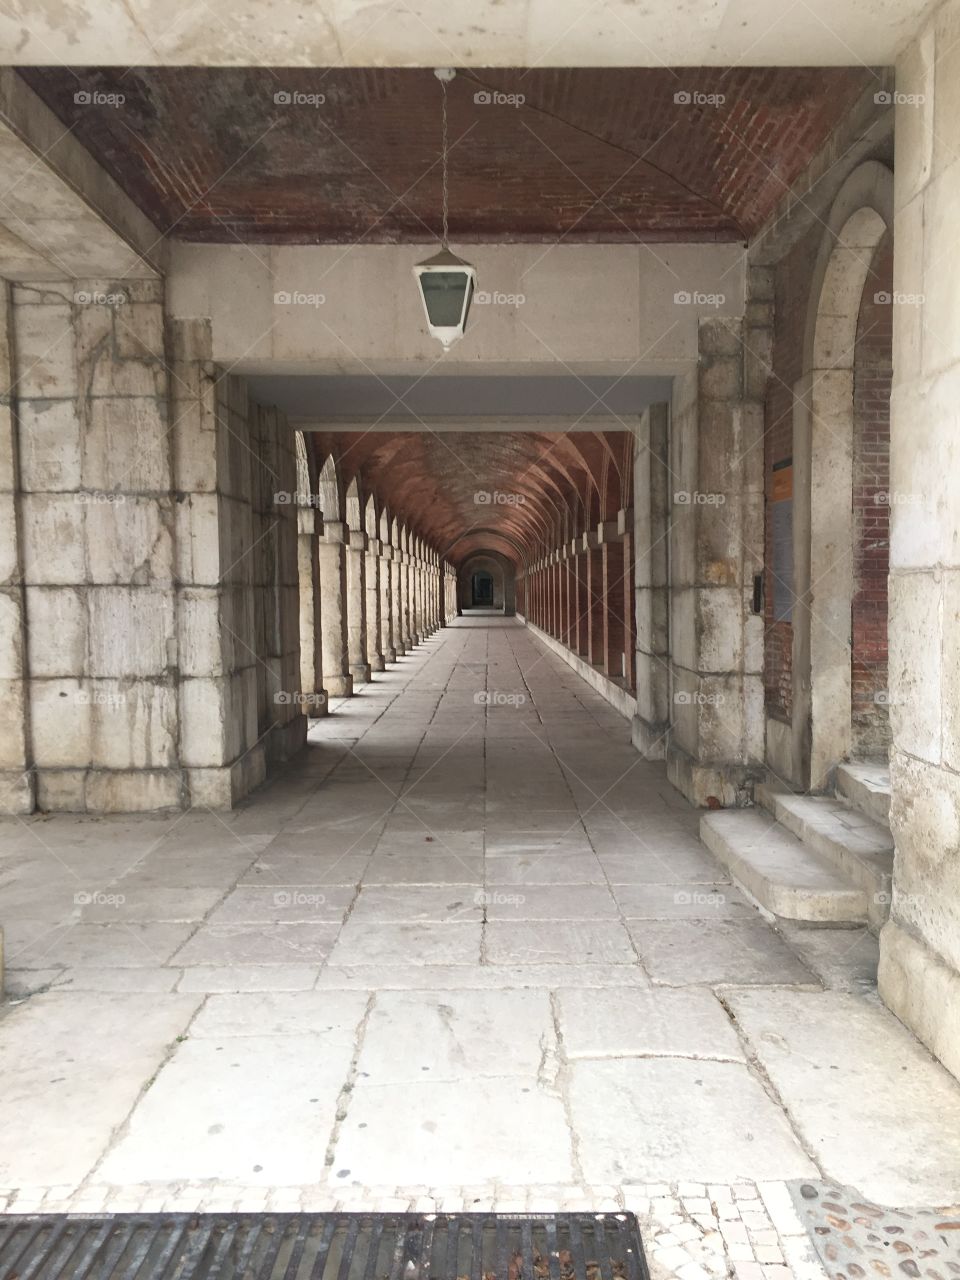 Almost like a mysterious dimension, this pathway to the royal Palace was created in a way to lead to into another world. With its tall arches and arches the made the hall way seem as if it stretched out so far away. 